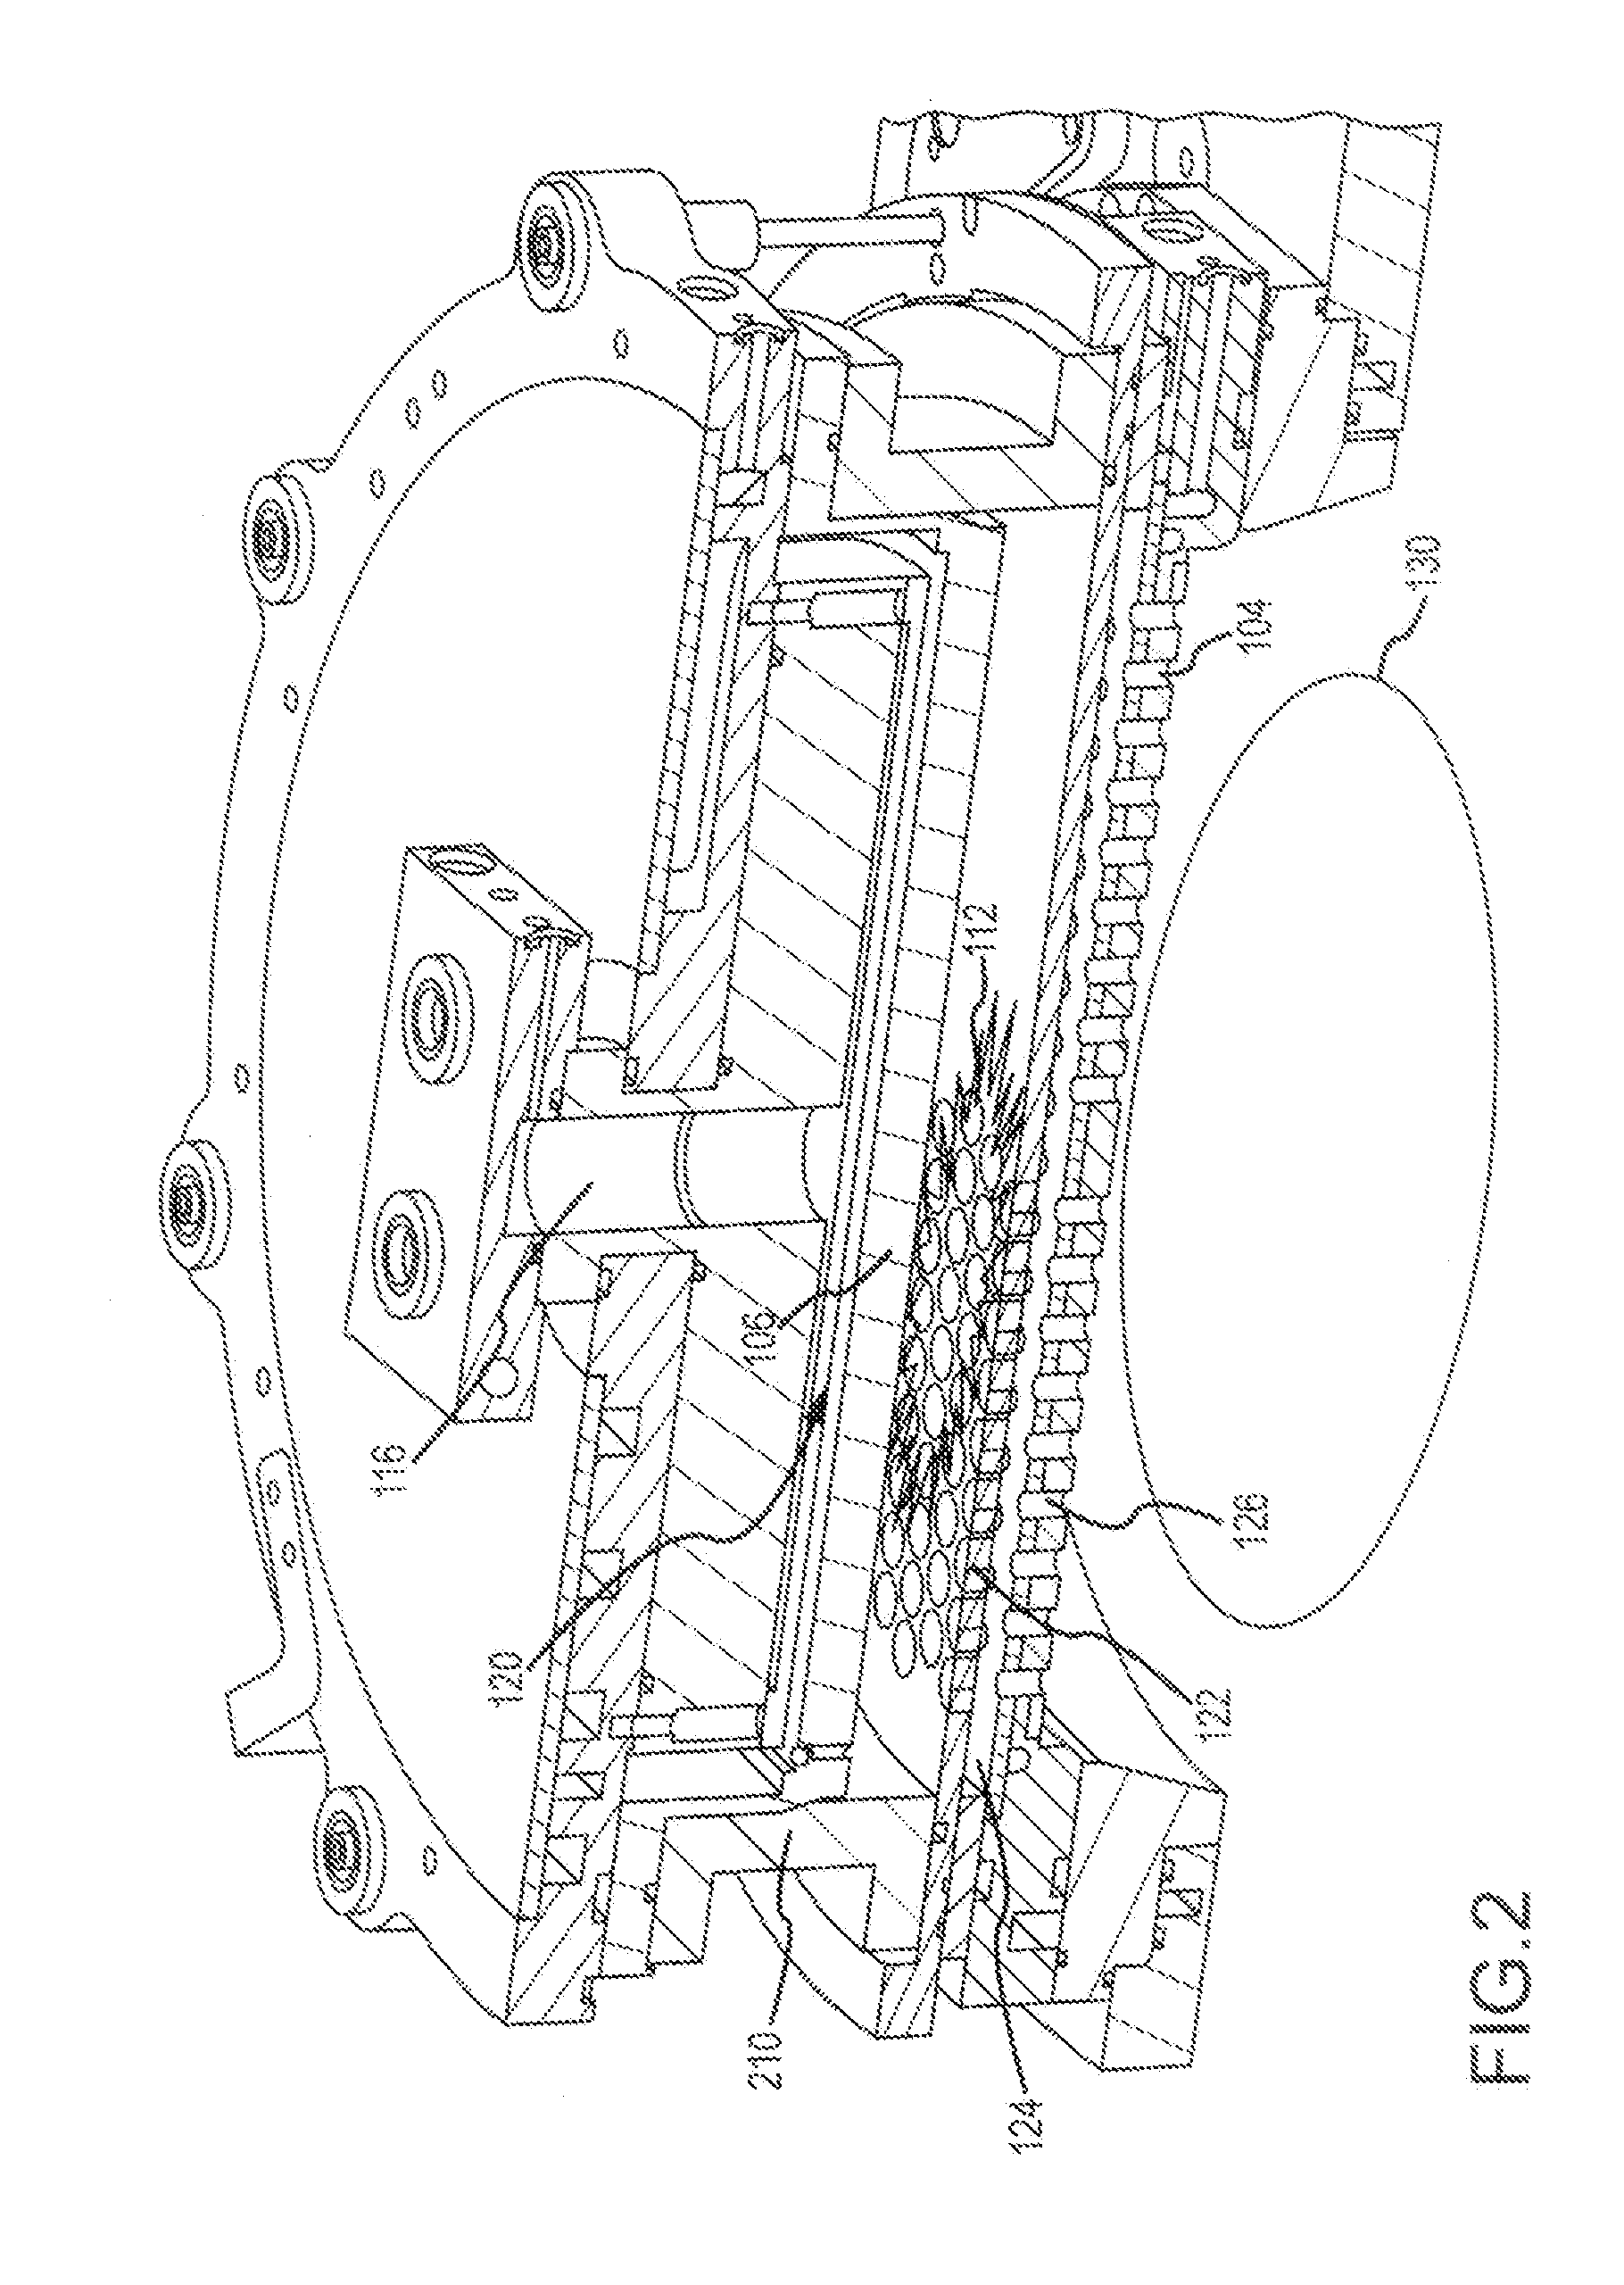 Semiconductor processing system and methods using capacitively coupled plasma